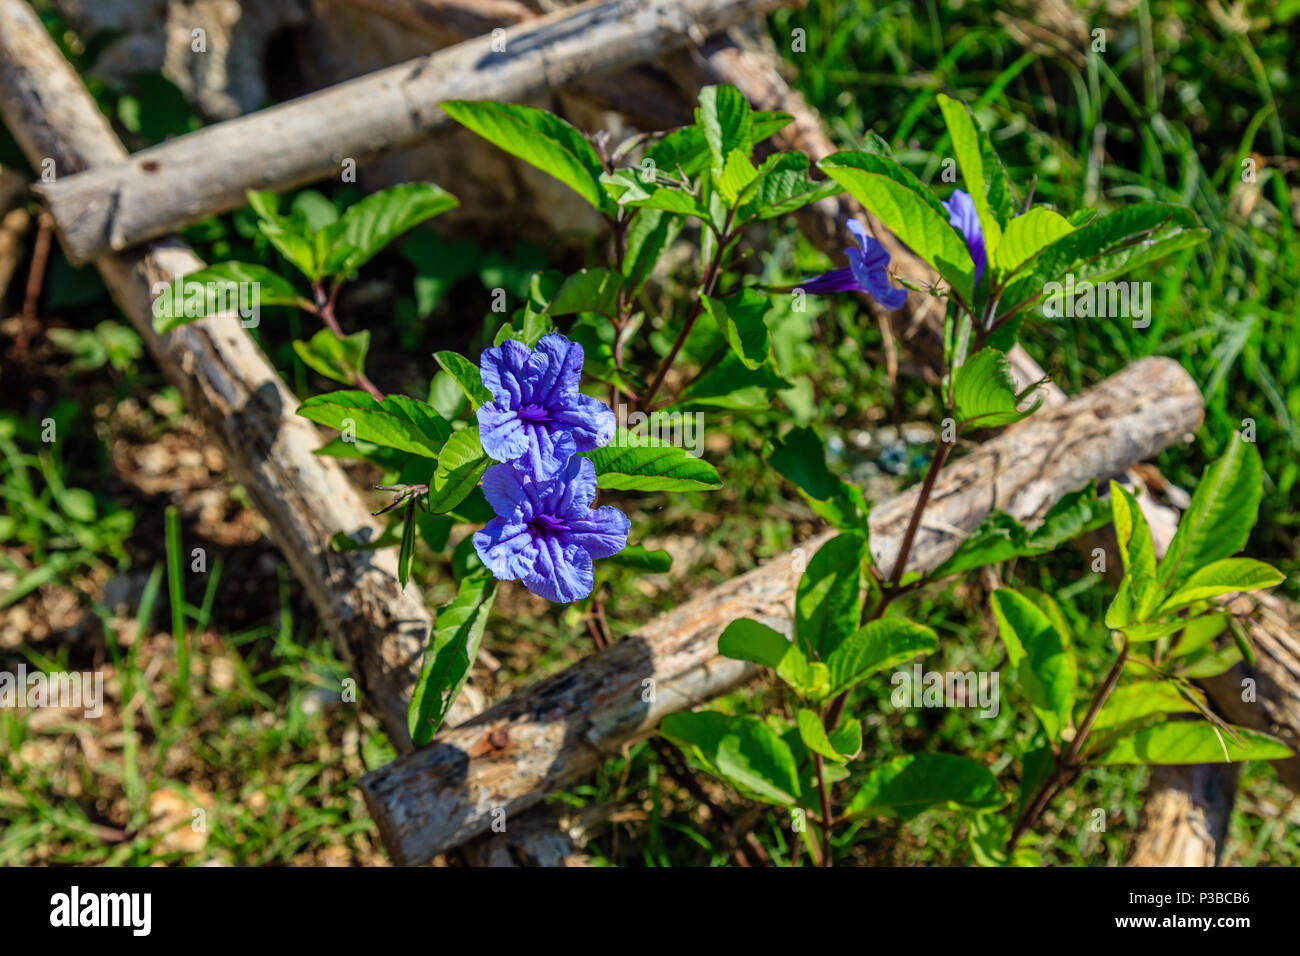 Blooming Mexican Petunia growing through a wooden ladder, Nusa Lembongan, Indonesia Stock Photo